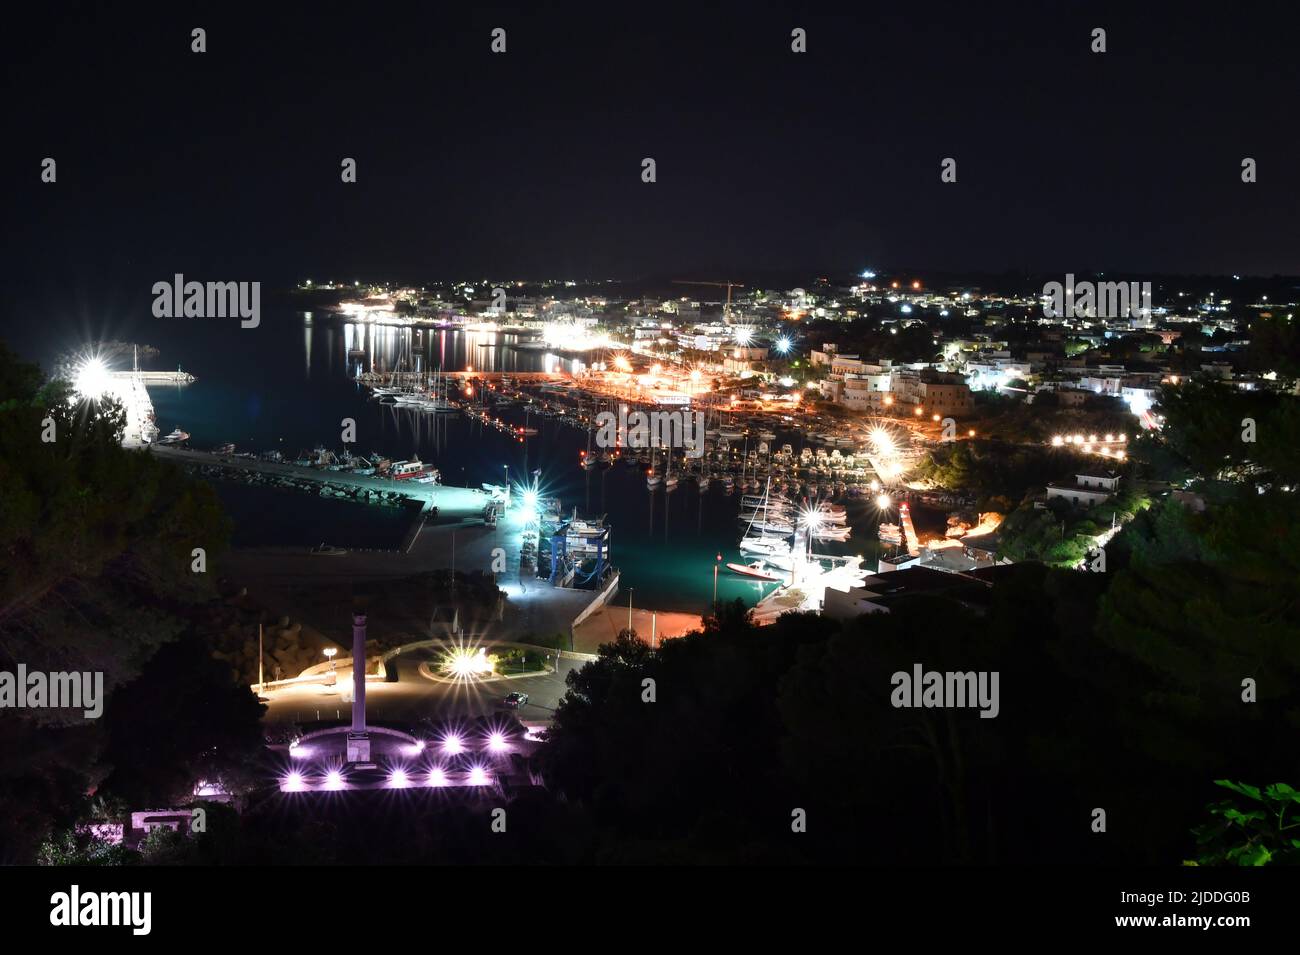 Night view of Santa Maria di Leuca, a town in southern Italy in the province of Lecce. Stock Photo